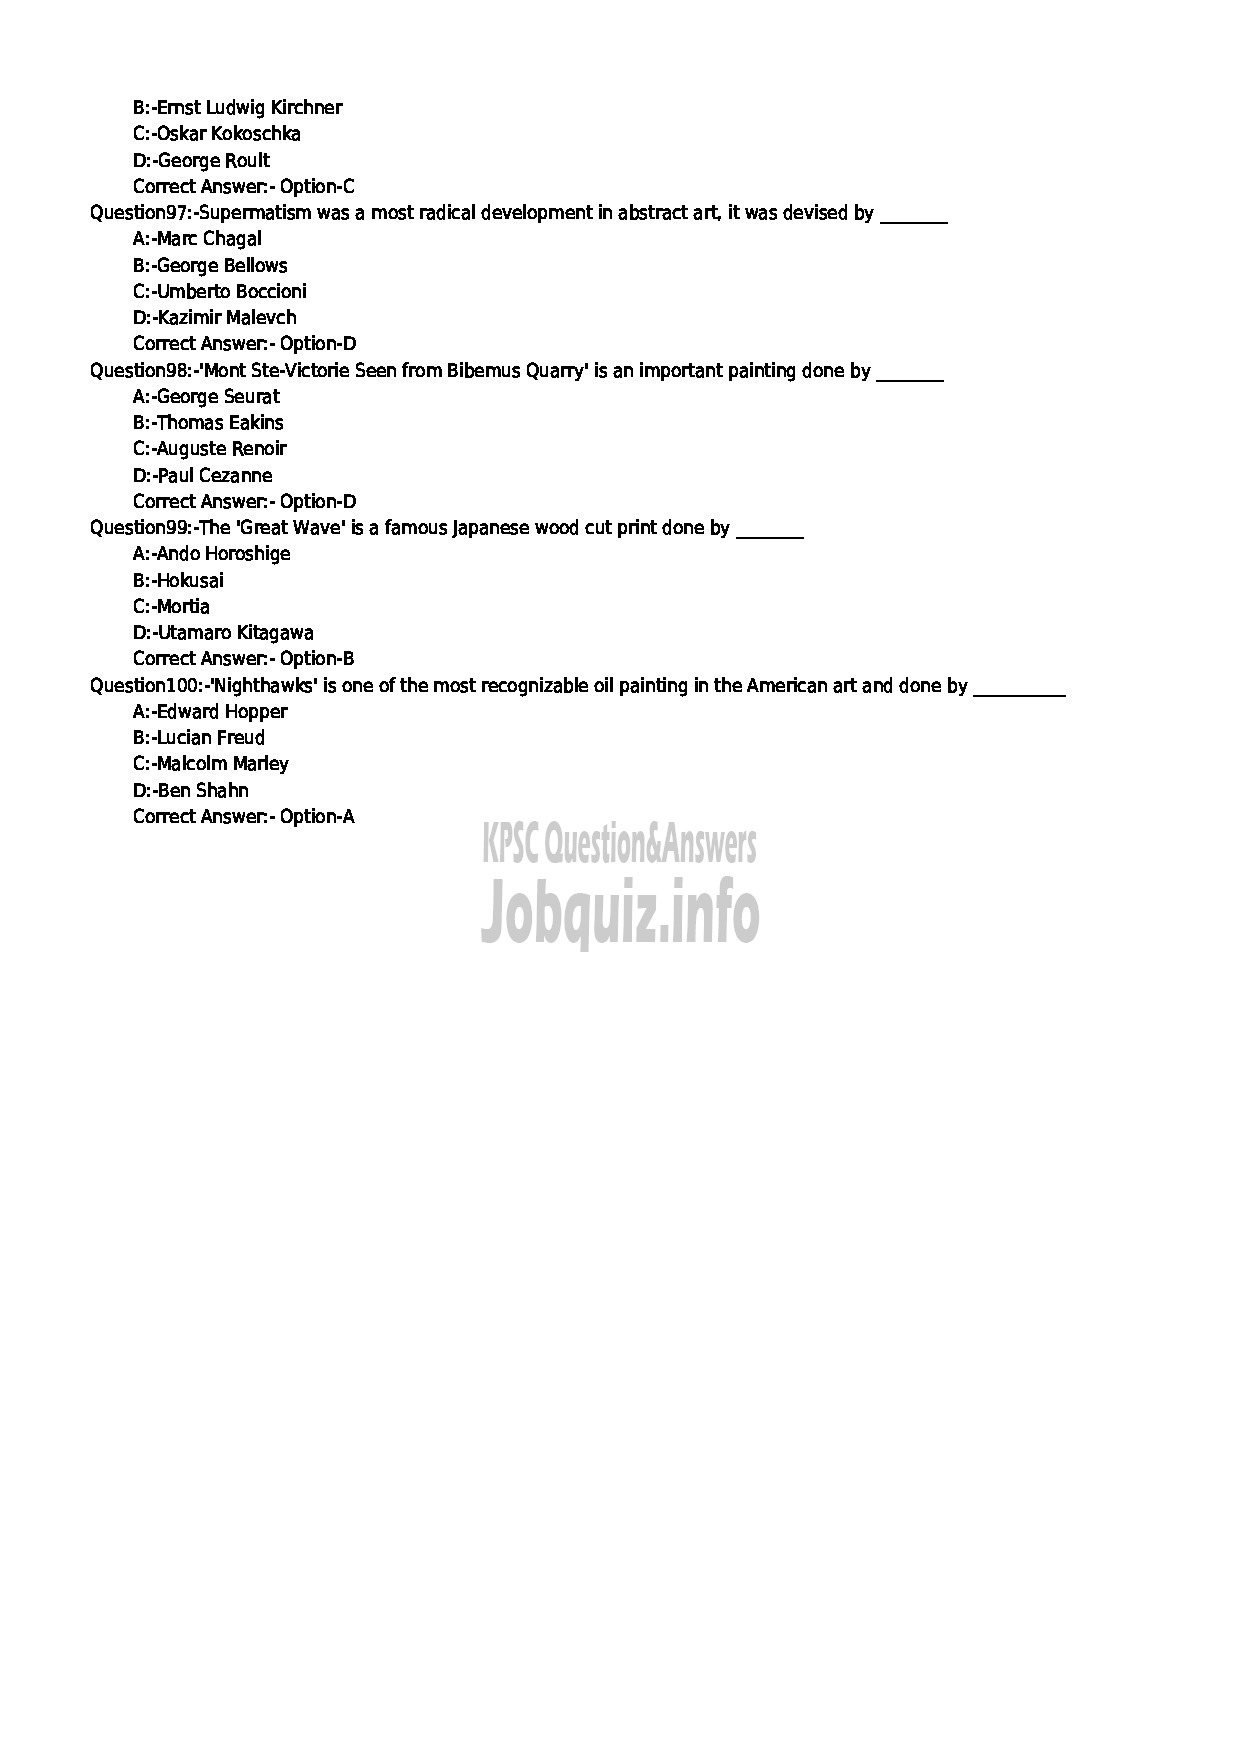 Kerala PSC Question Paper - LECTURER IN PAINTING TECHNICAL EDUCATION-11